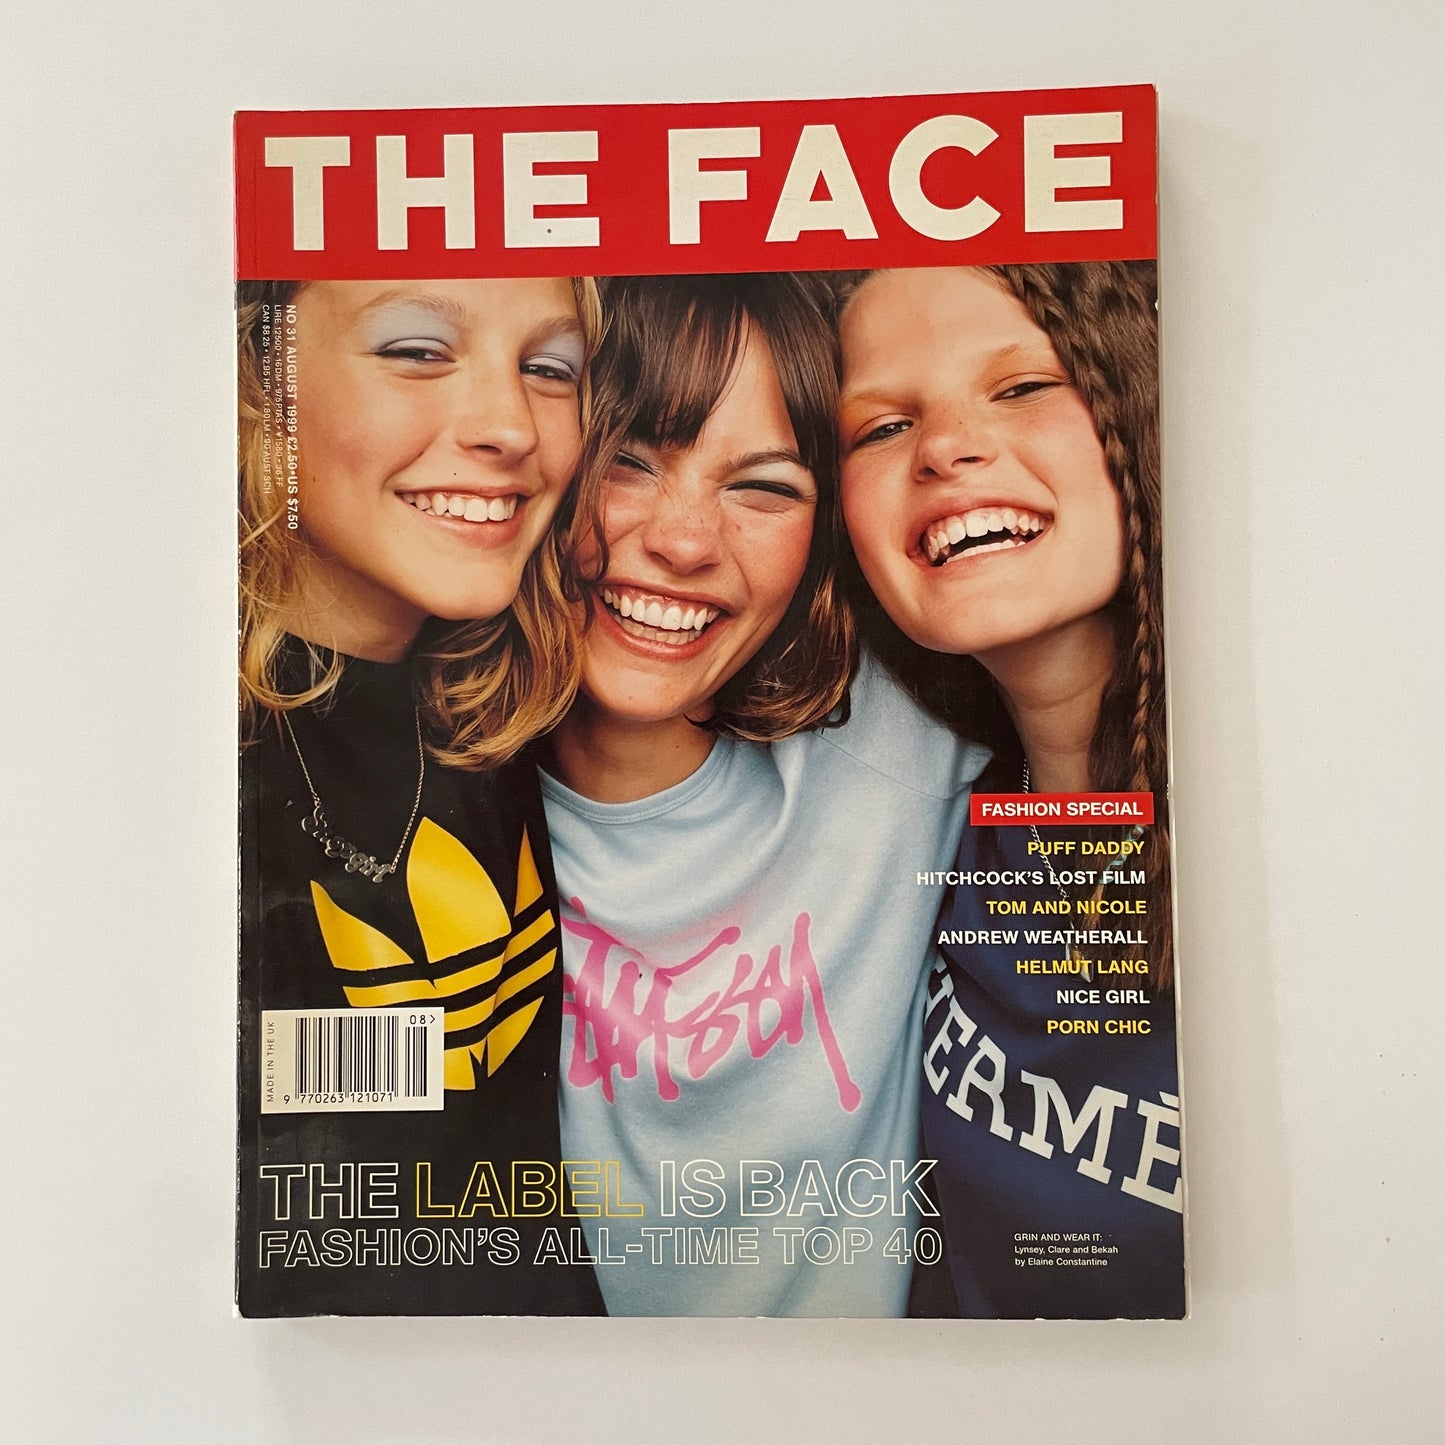 The Face No.31 - August 1999